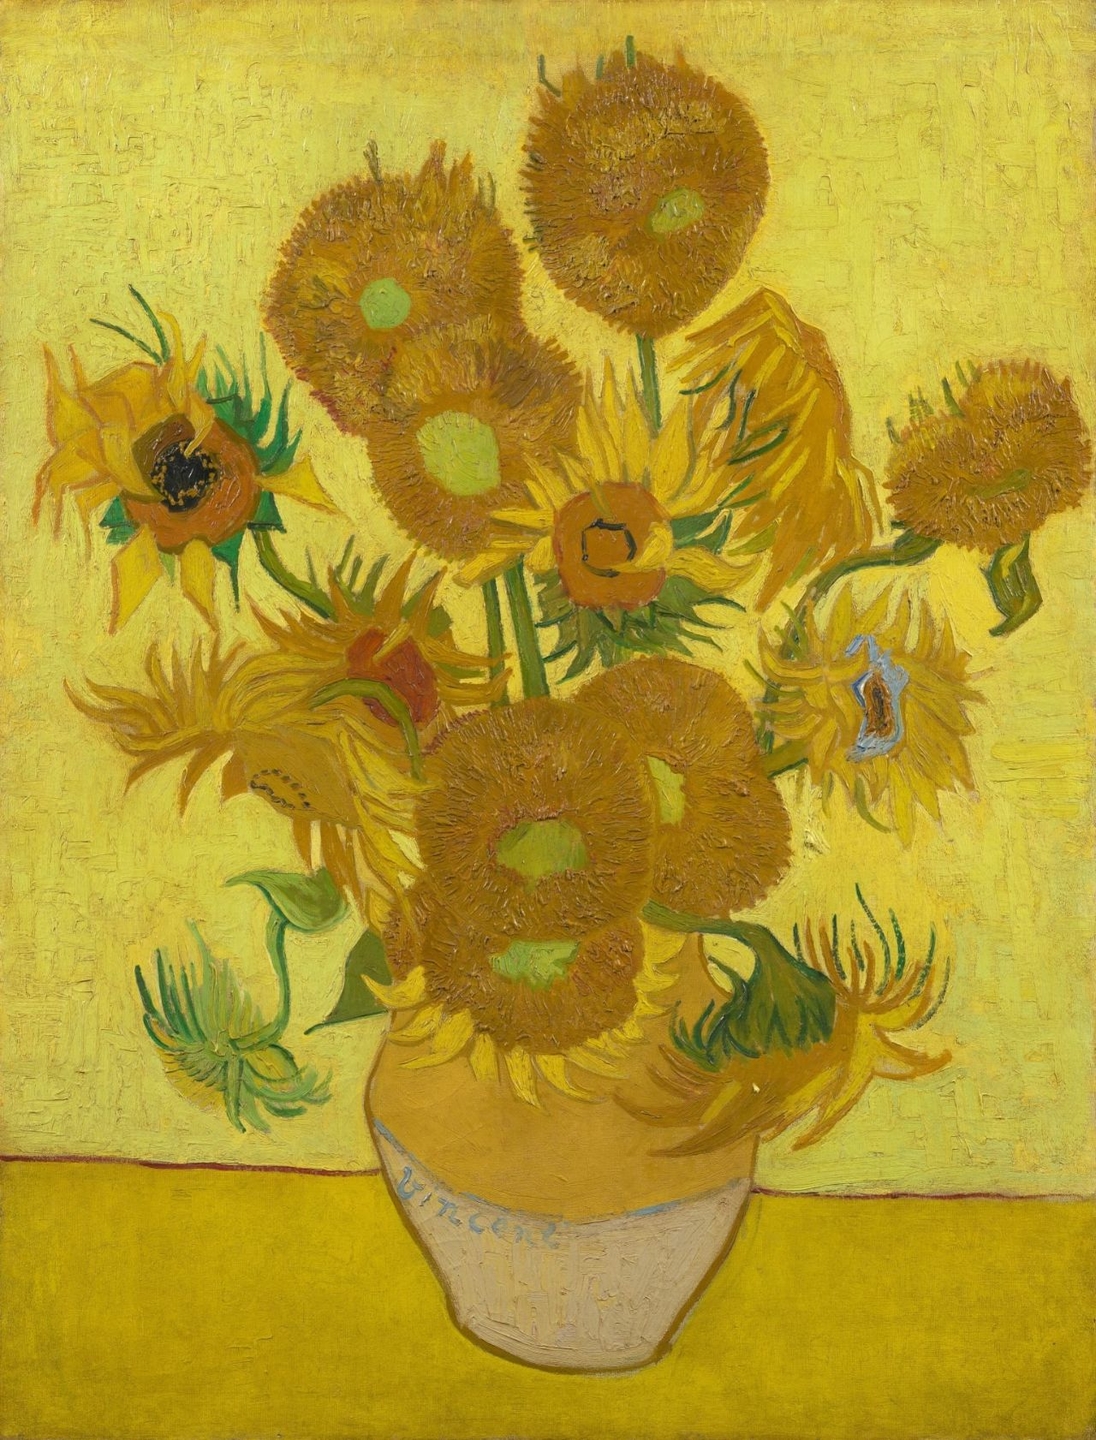 Is Van Gogh's sunflower painting in the Van Gogh museum his first version?